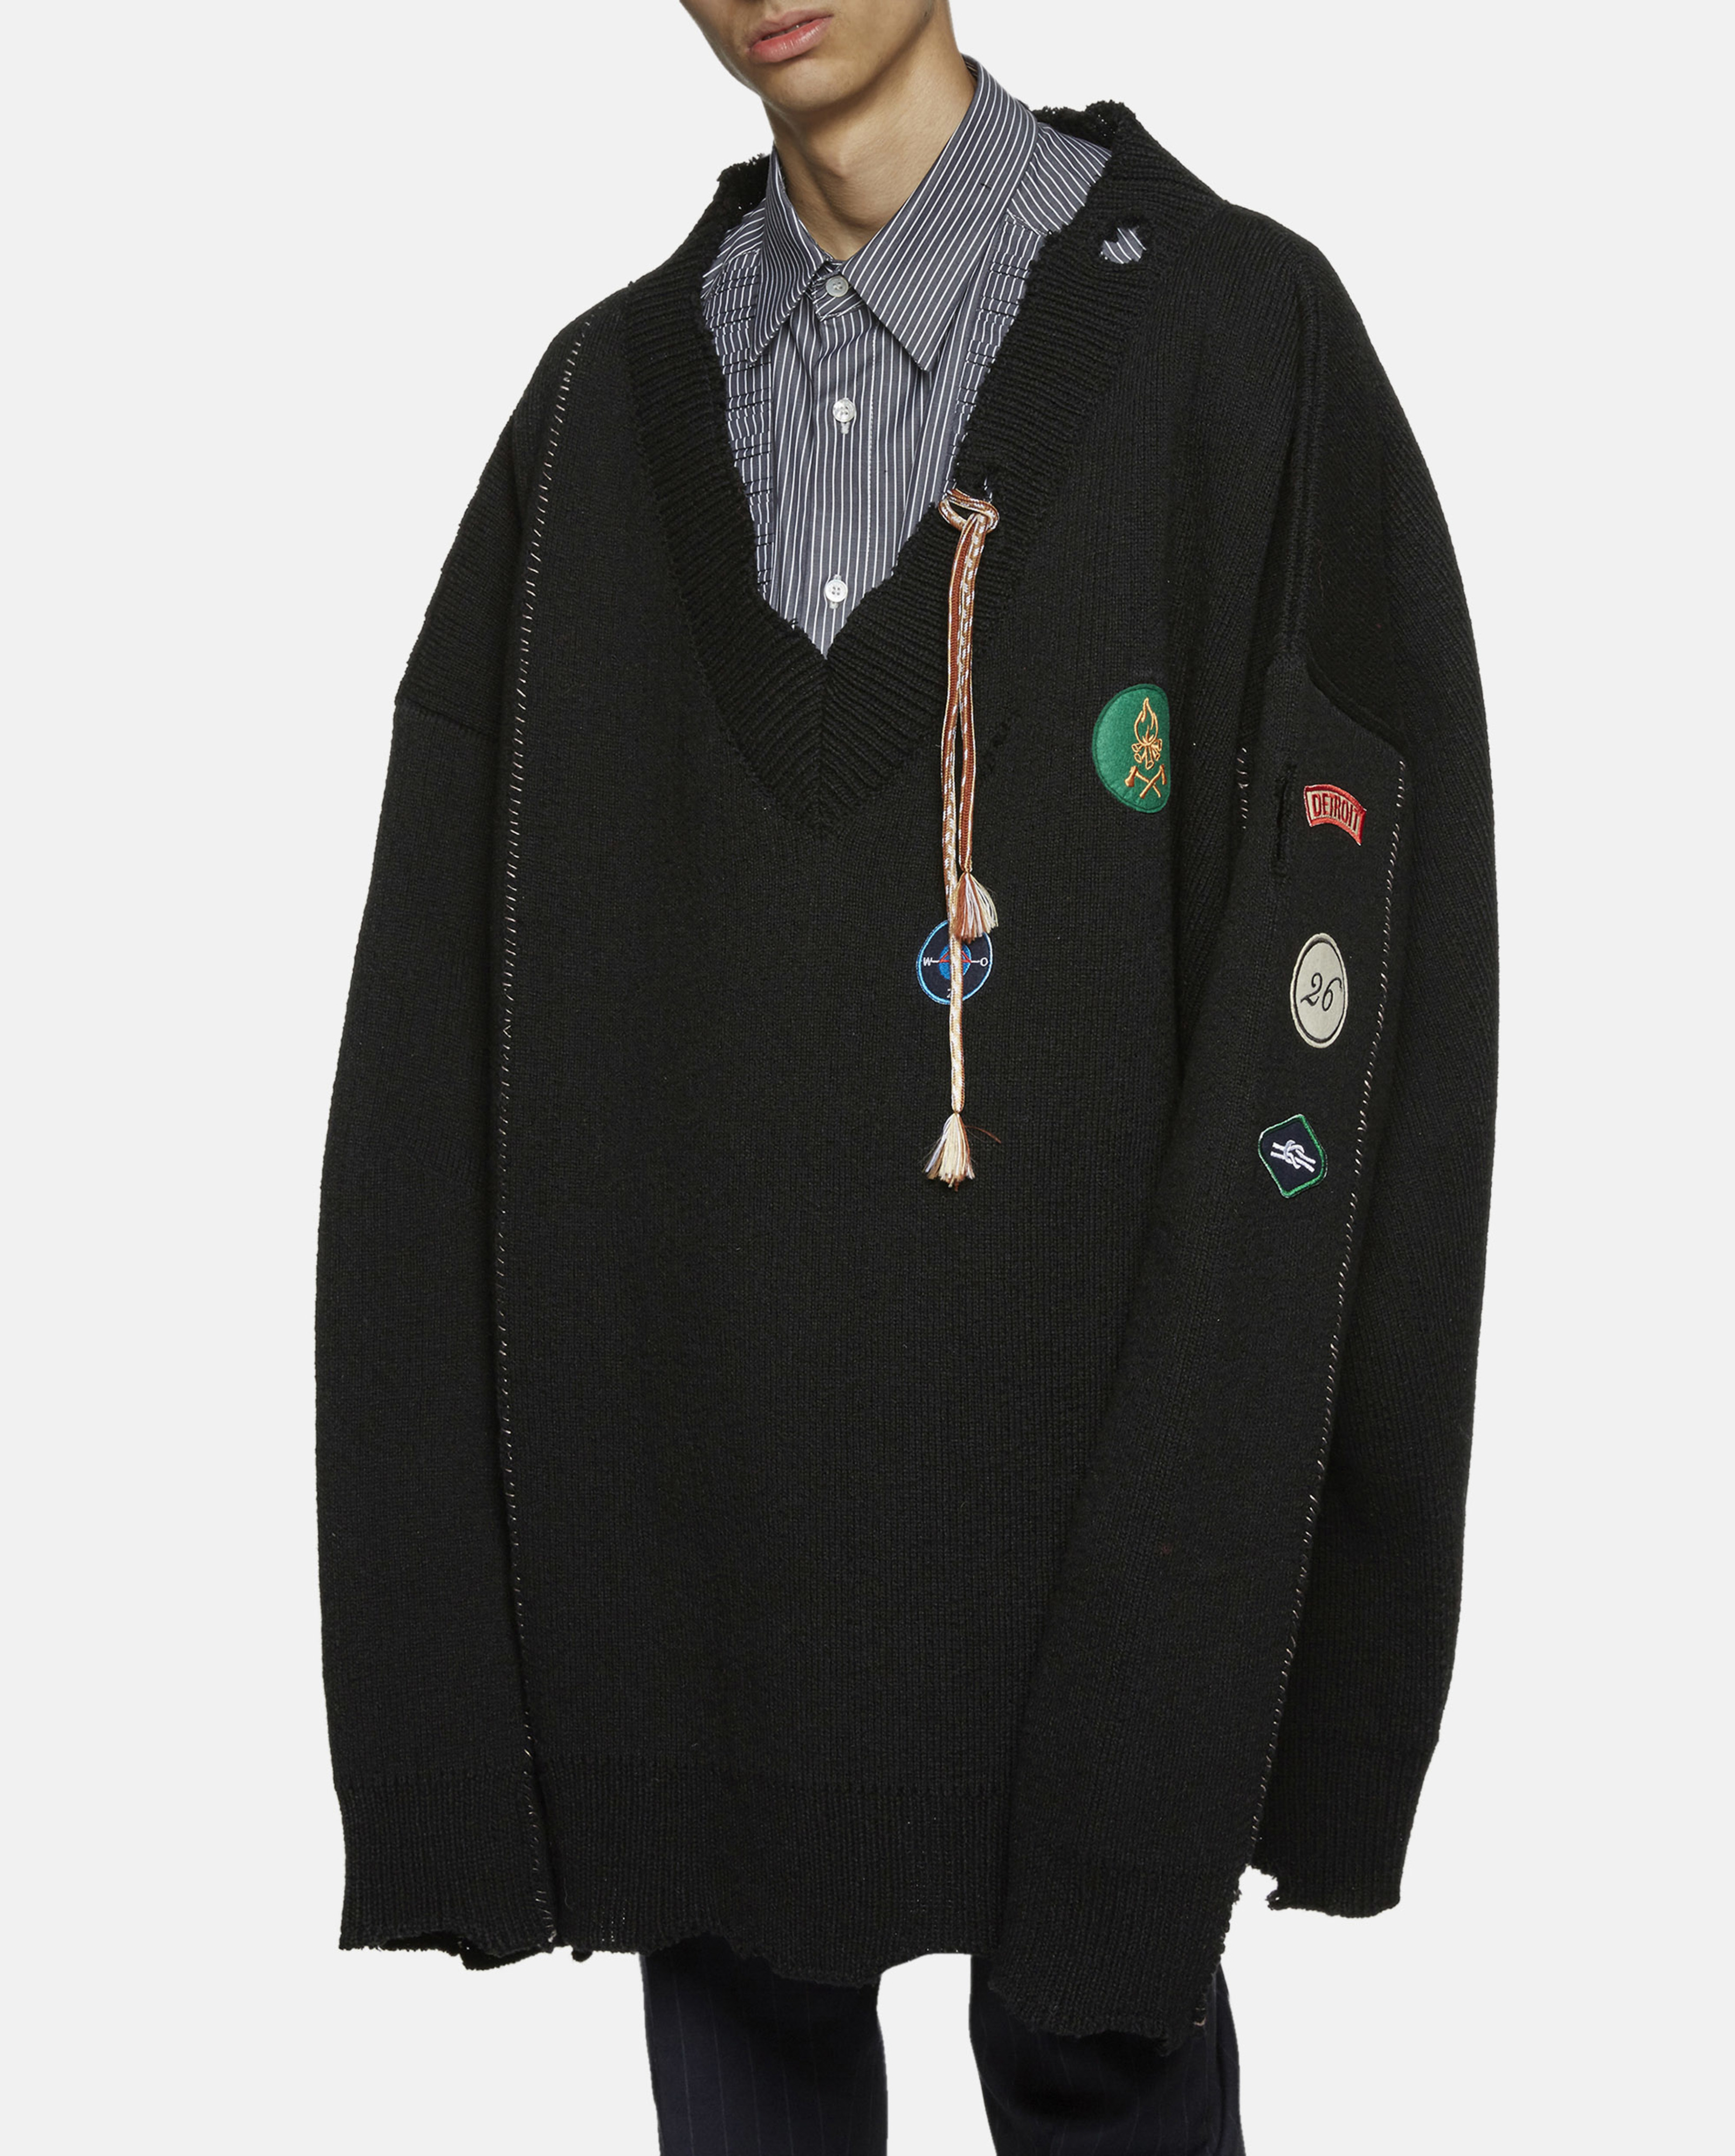 Raf Simons Wool Oversized Destroyed V-neck Knit Sweater With Scout Badges  for Men - Lyst